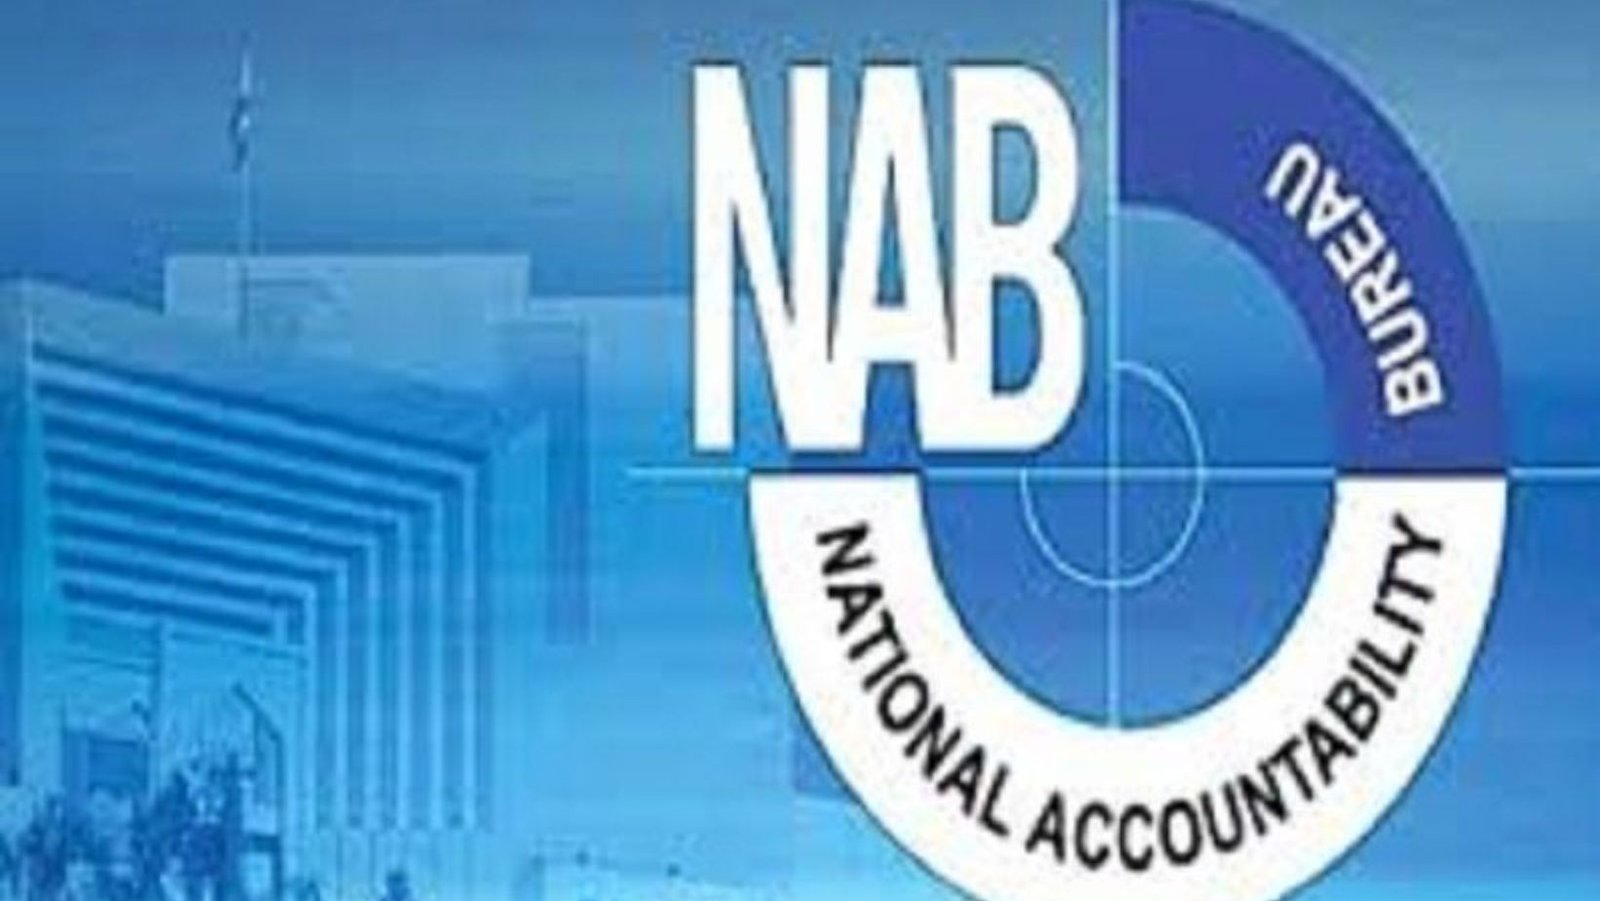 Investigation on the former NAB chief